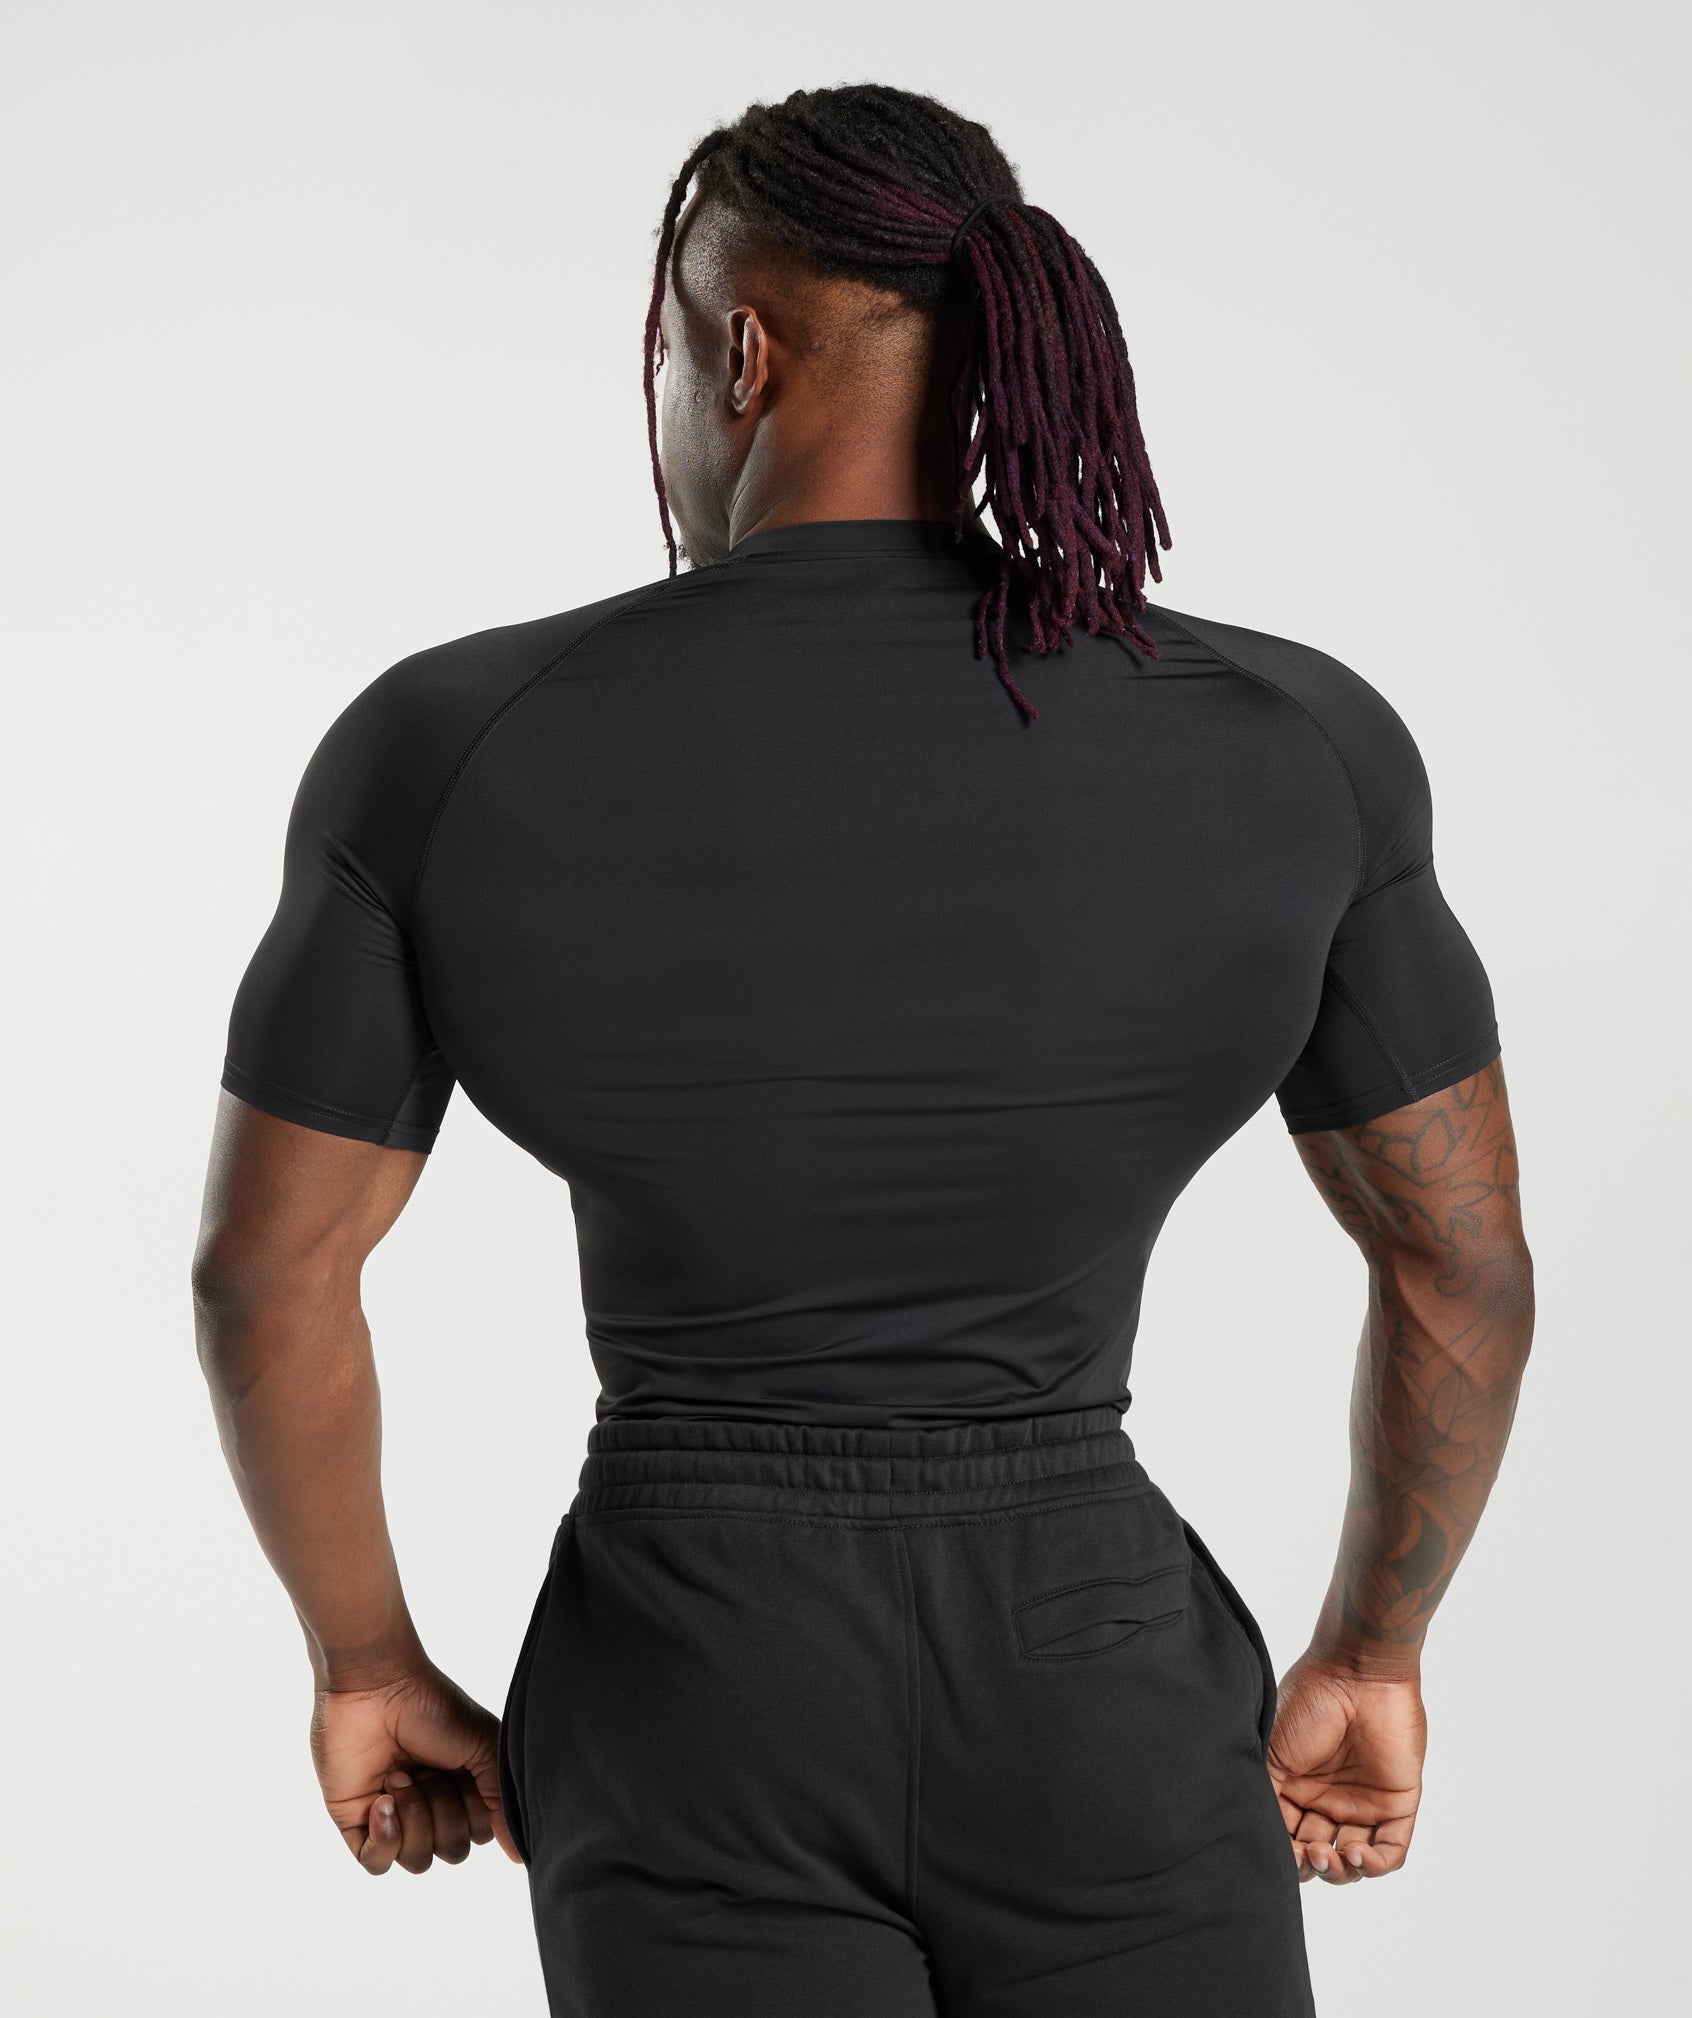 REVIEW #003 - Gymshark Element Compression Top 